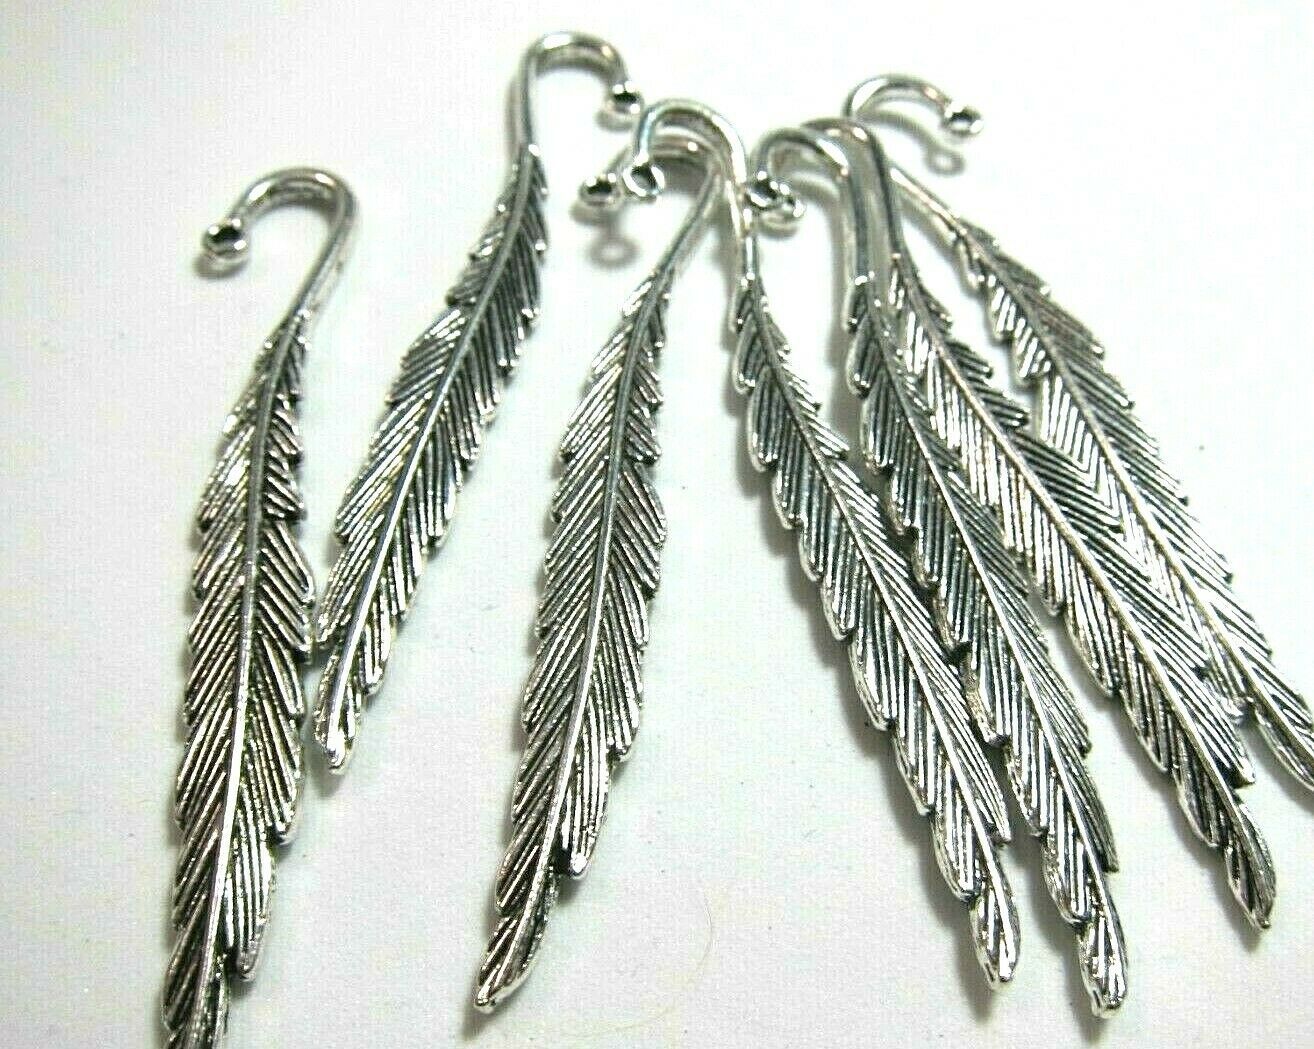 Lot of 10 Big Pewter Feather Focal Pendants 3inch Leadfree Silvertone USA Seller